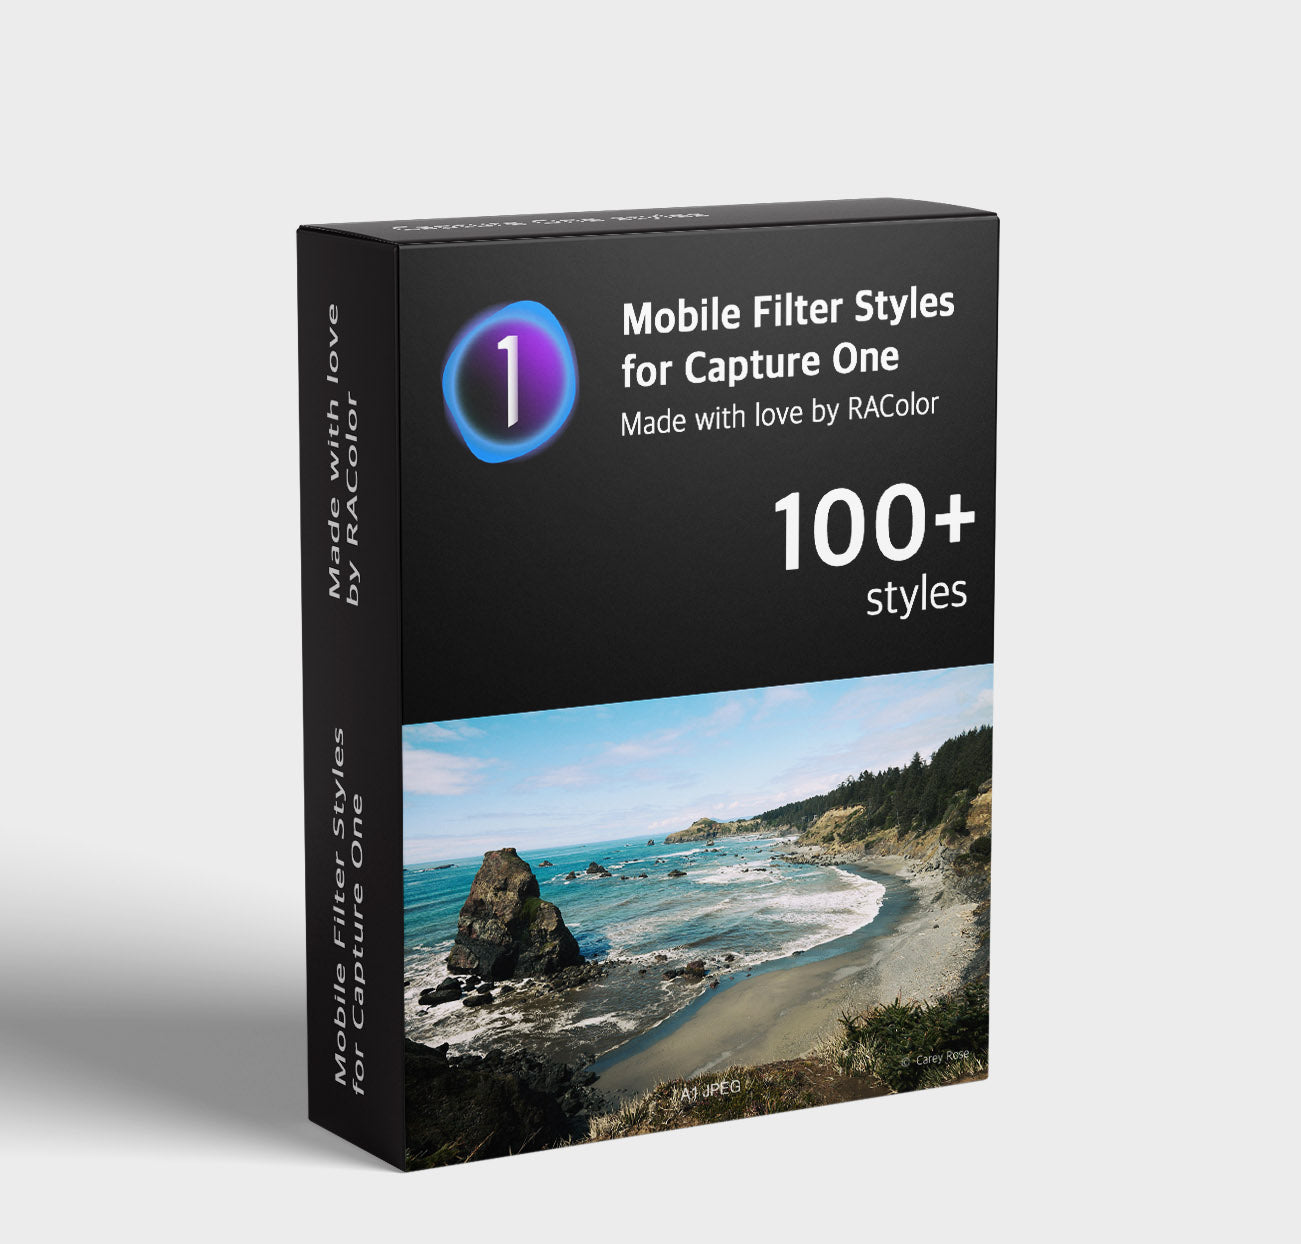 Mobile Filter Styles for Capture One (100+ styles)